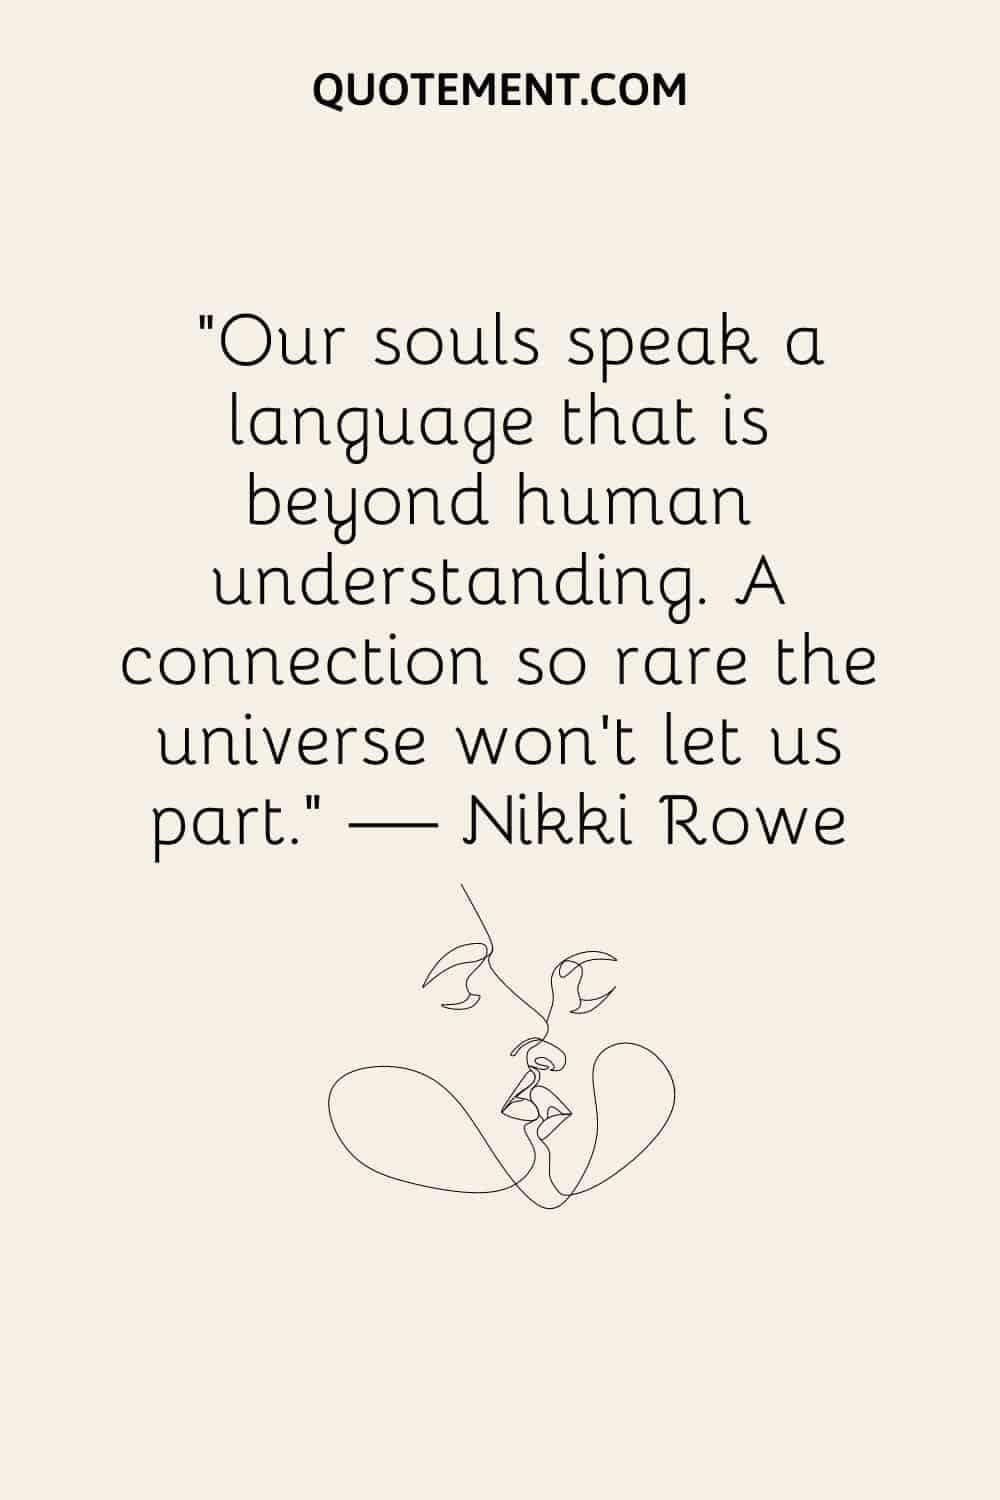 Our souls speak a language that is beyond human understanding